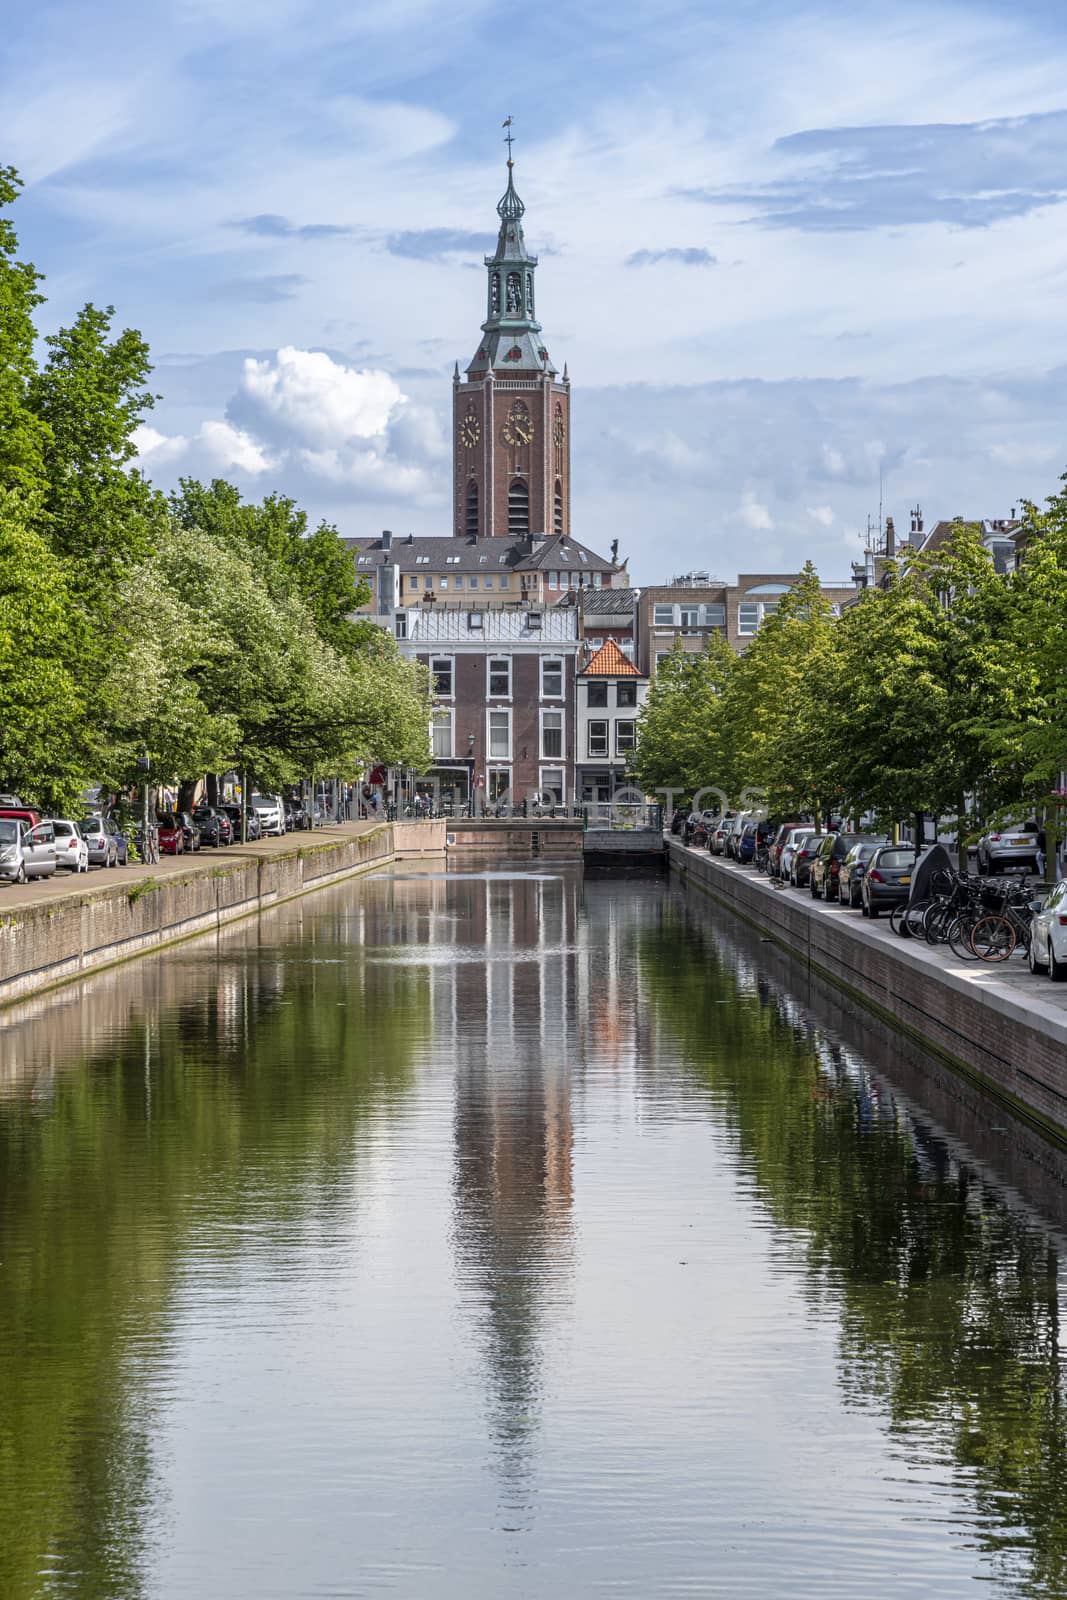 Saint James church reflected on the canal calm water nested to the royal stable, in The Hague  by ankorlight